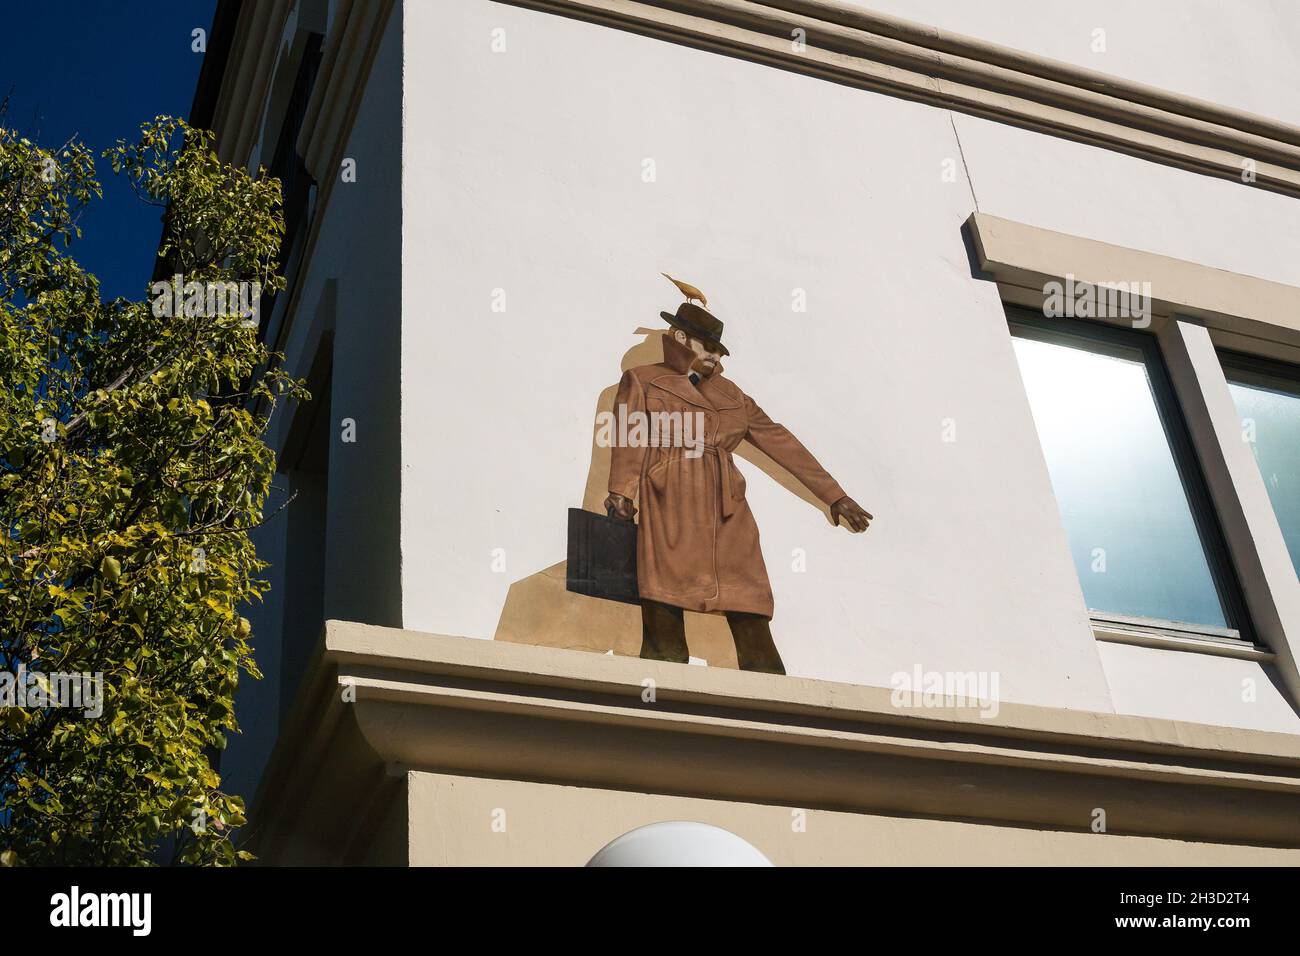 The Inspector - Trompe-l'oeil mural of a man on a ledge, by Greg Brown, on the side of the Avid Bank at 192 Lytton Ave, Palo Alto, California. Stock Photo